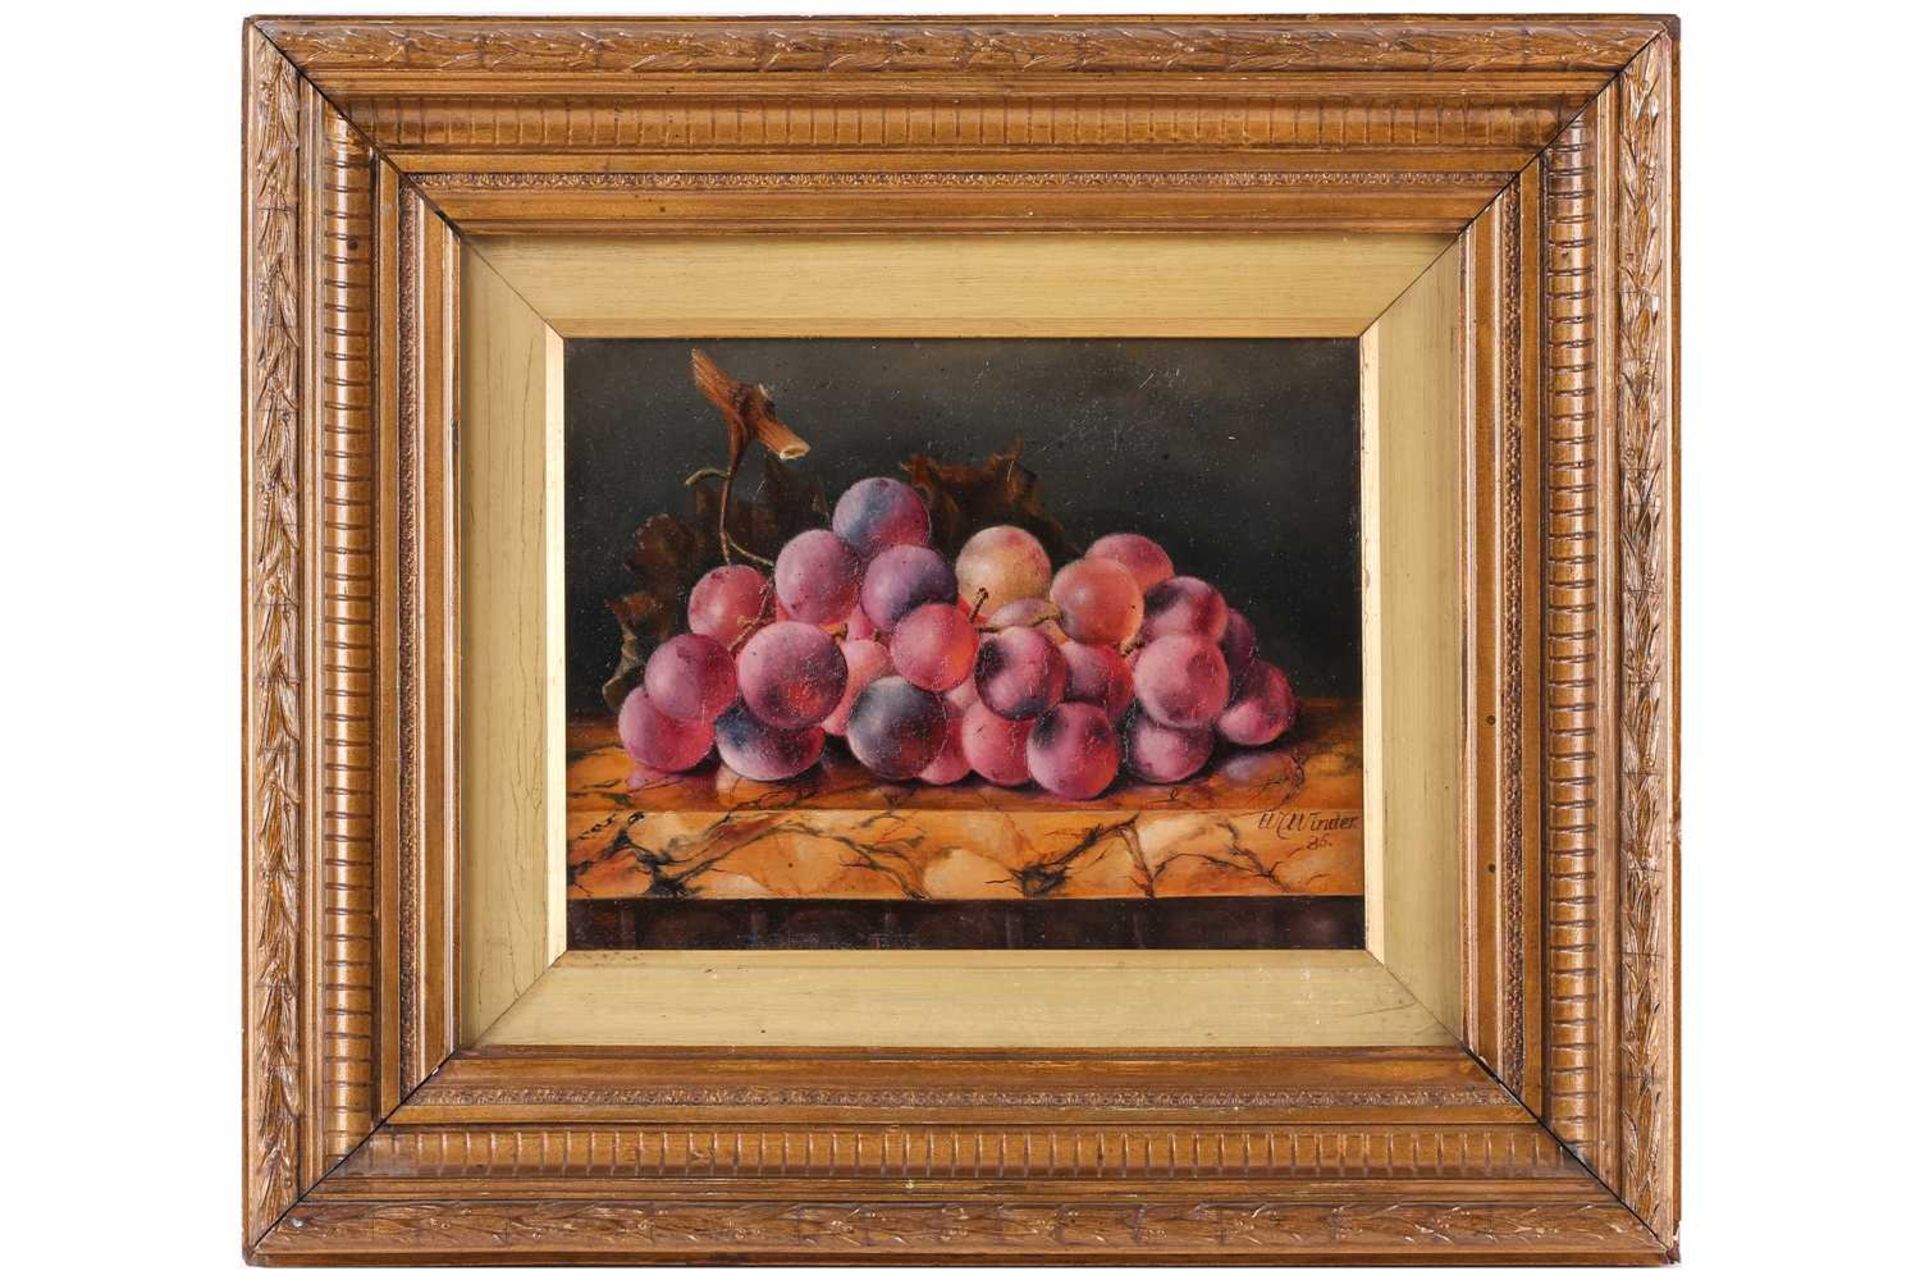 W. Winder (19th century), still life of grapes on marble, signed and dated '85, oil on panel, 17 x